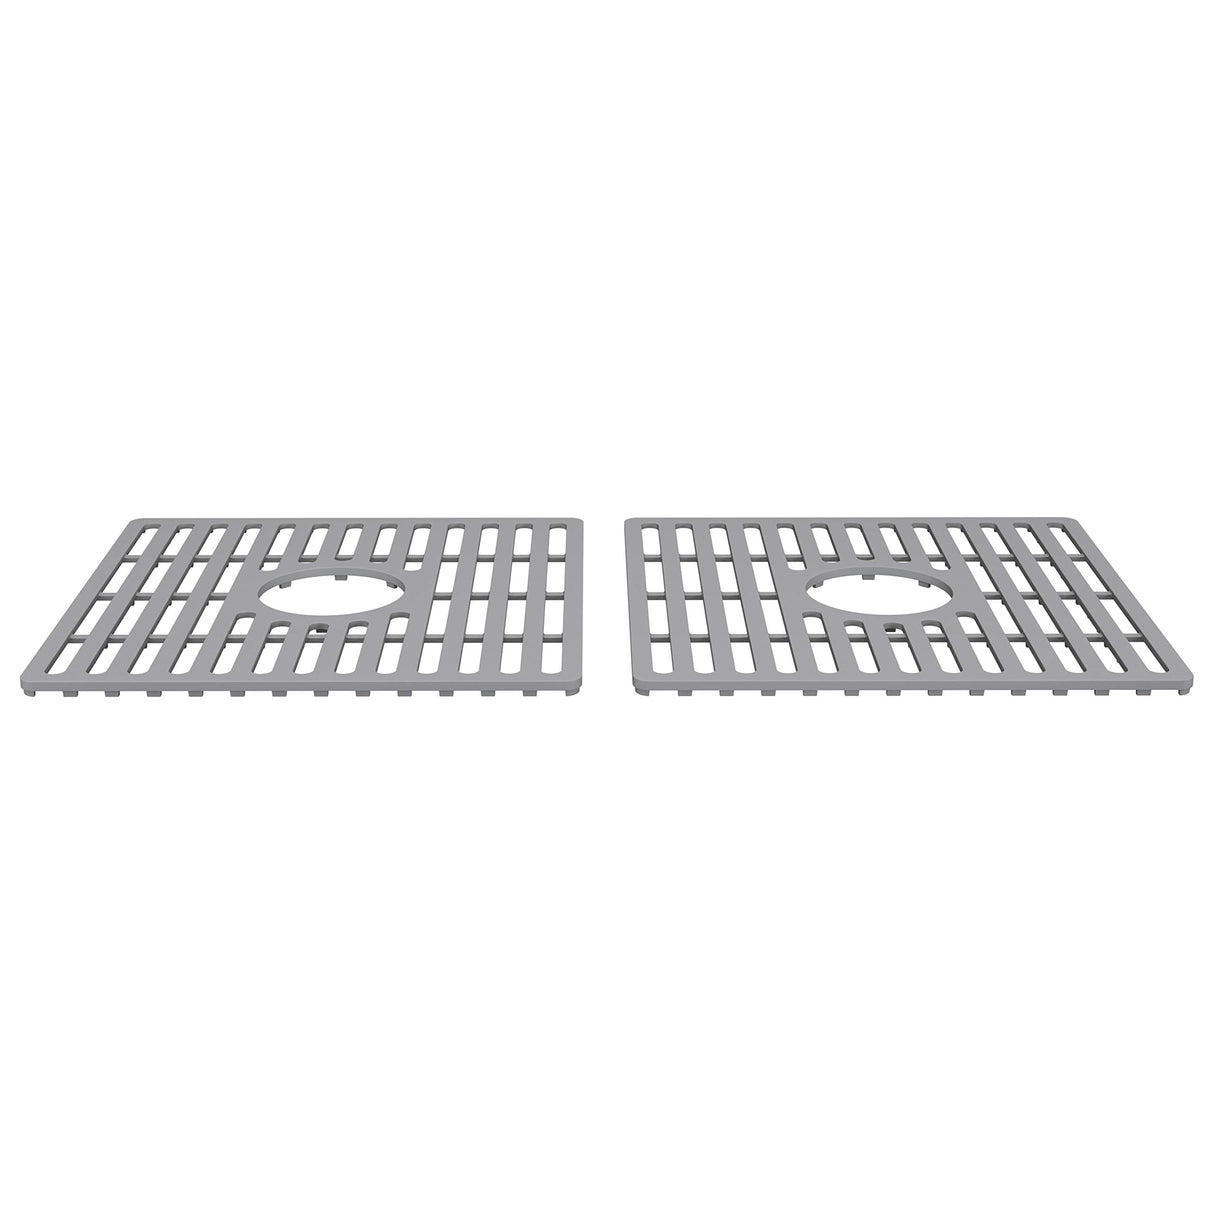 VIGO 15 in. x 15 in. Silicone Bottom Grid for Double Bowl Kitchen Sink in Gray (2-Pack)